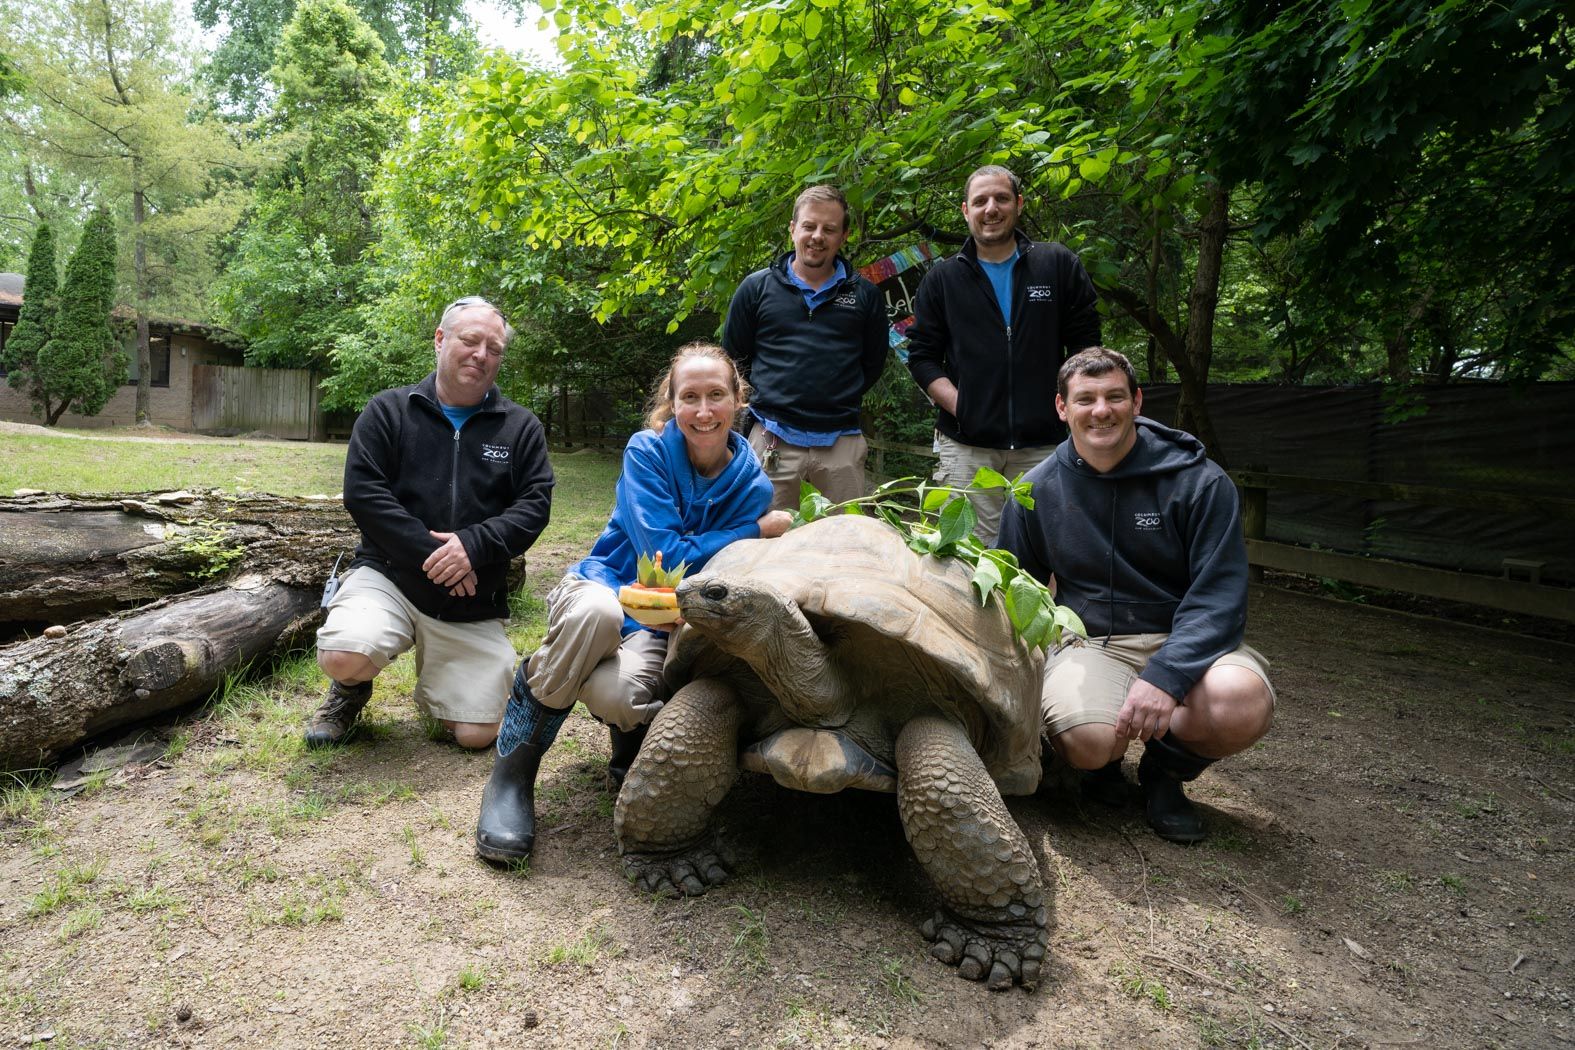 Zoo employees stand around a tortoise